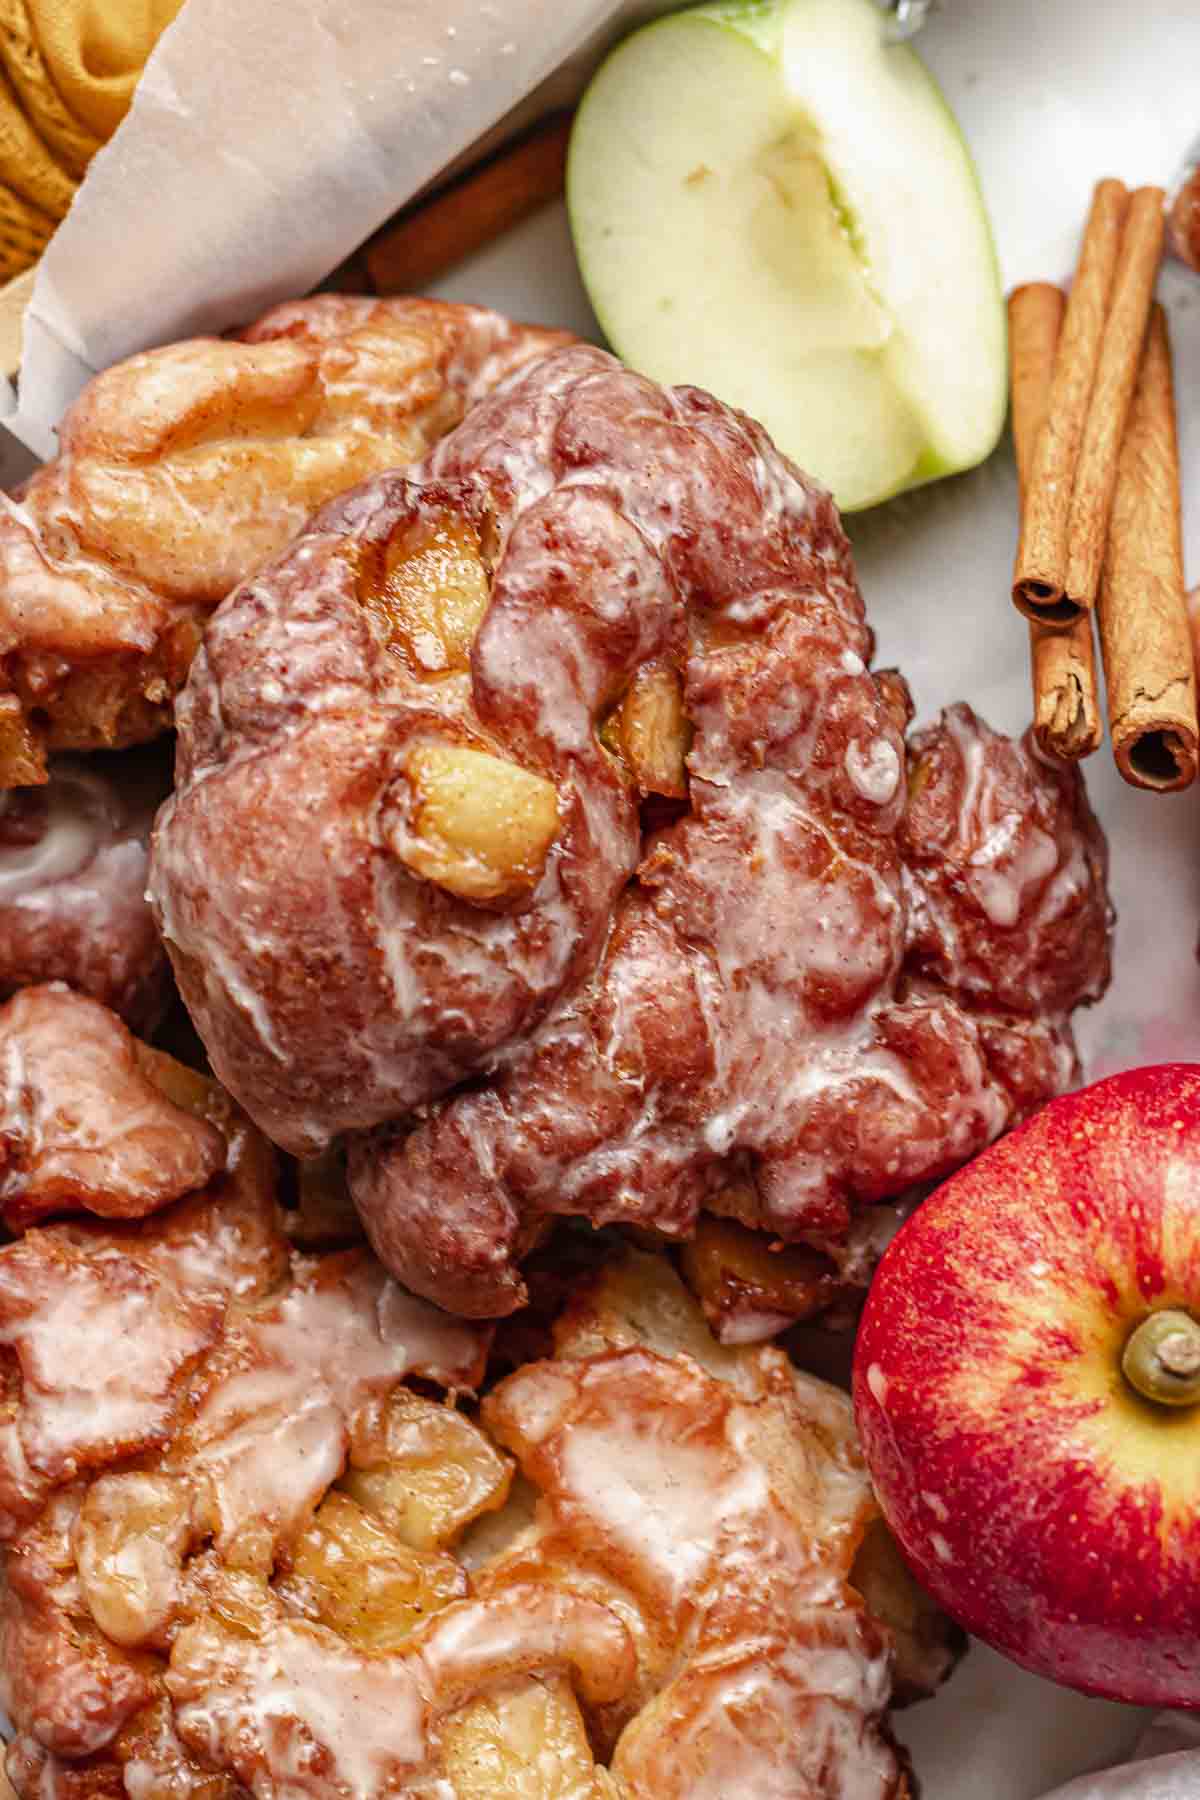 Apple fritter donut in a basked with apples and cinnamon sticks.